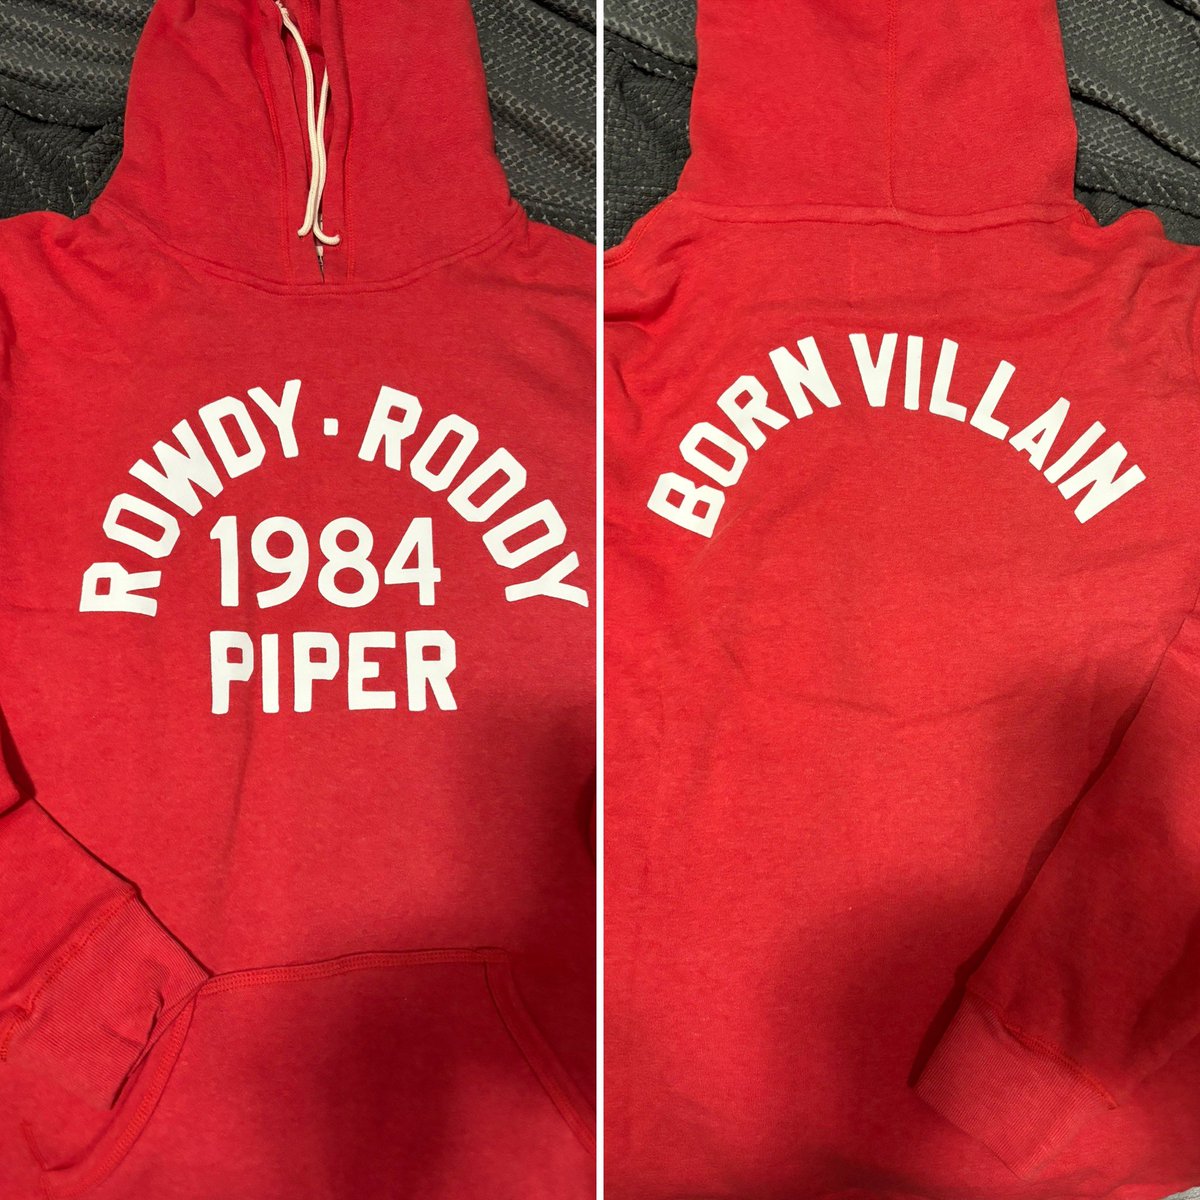 Had a new hoodie arrive from @rootsoffight today. Third hoodie since Jan! I cant say enough about the quality and comfort of their product! If you are a sports fan, check em out! Best part is, they are locally owned here in the Lower Mainland, BC!! rootsoffight.ca